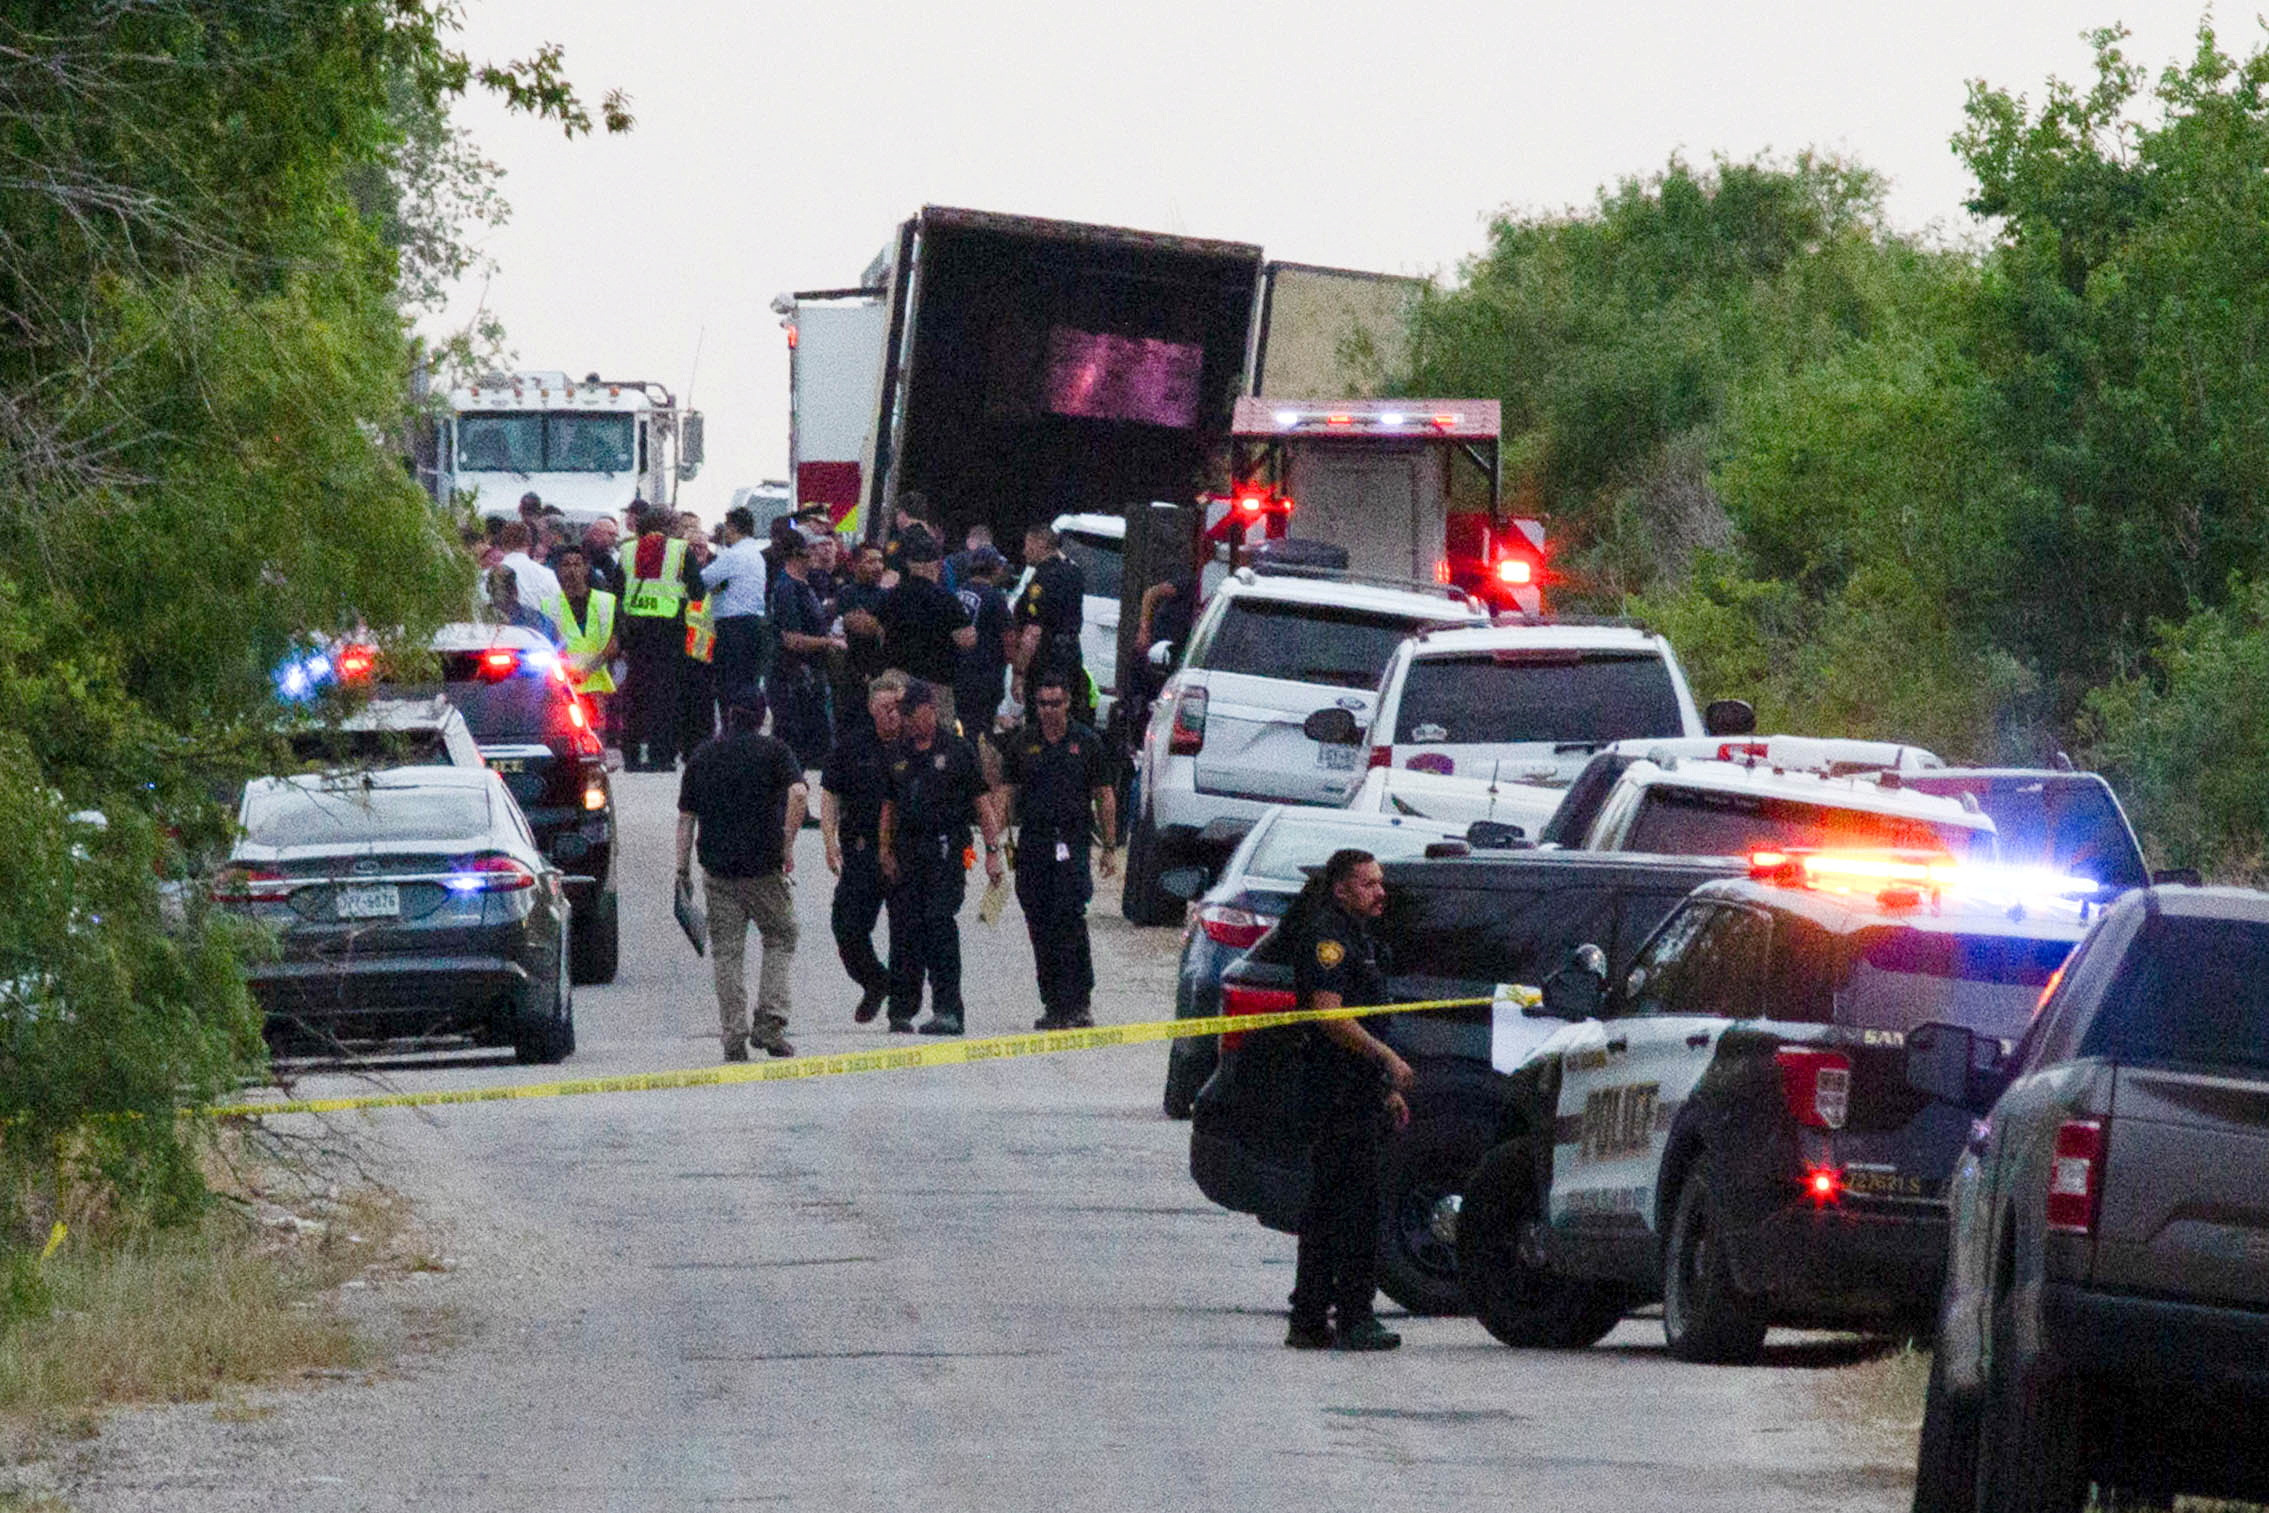 50 illegal immigrants die in trailer abandoned in Texas